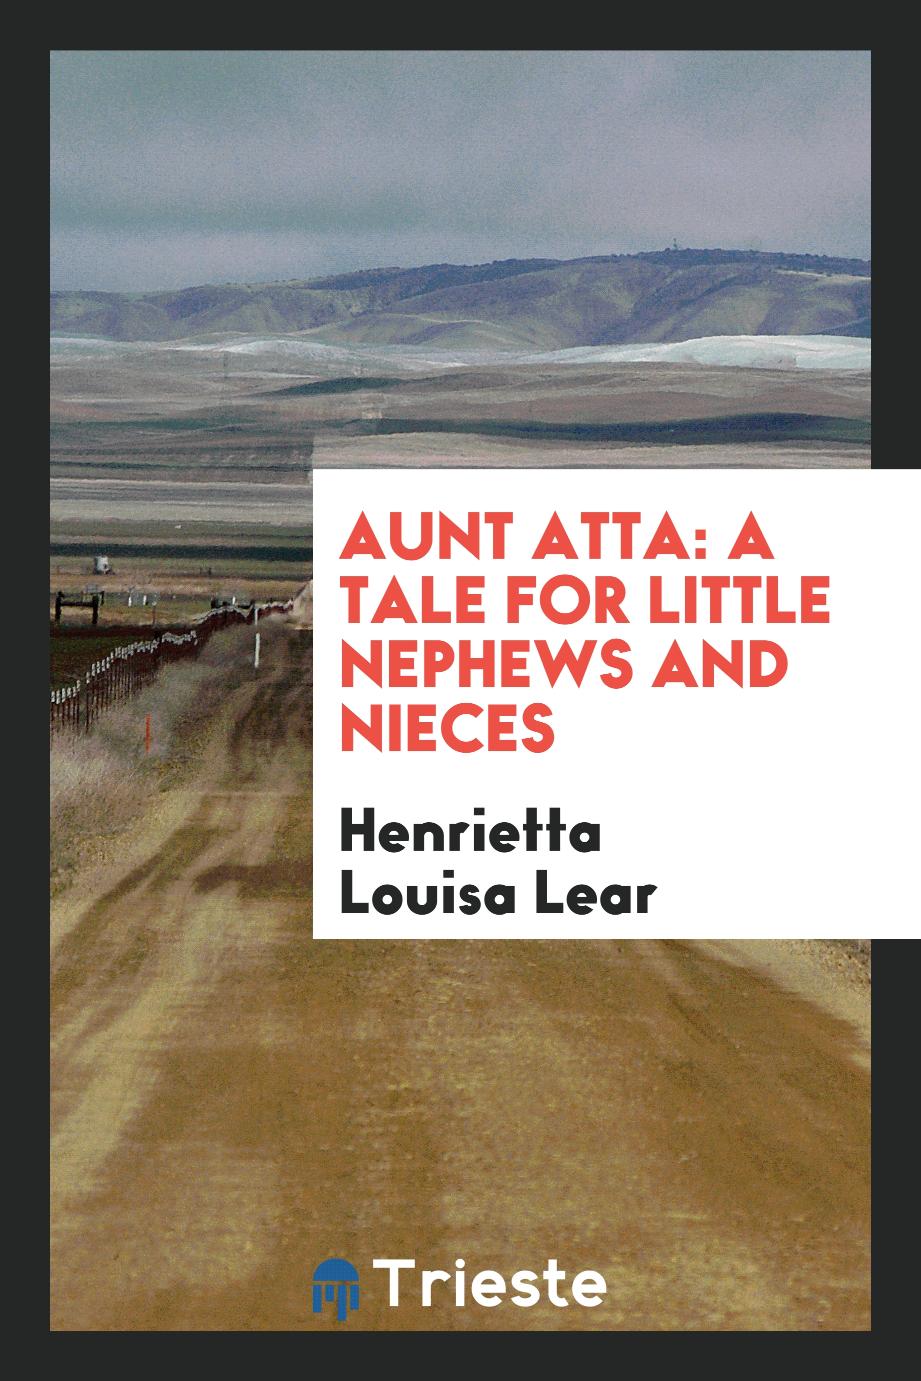 Aunt Atta: A Tale for Little Nephews and Nieces